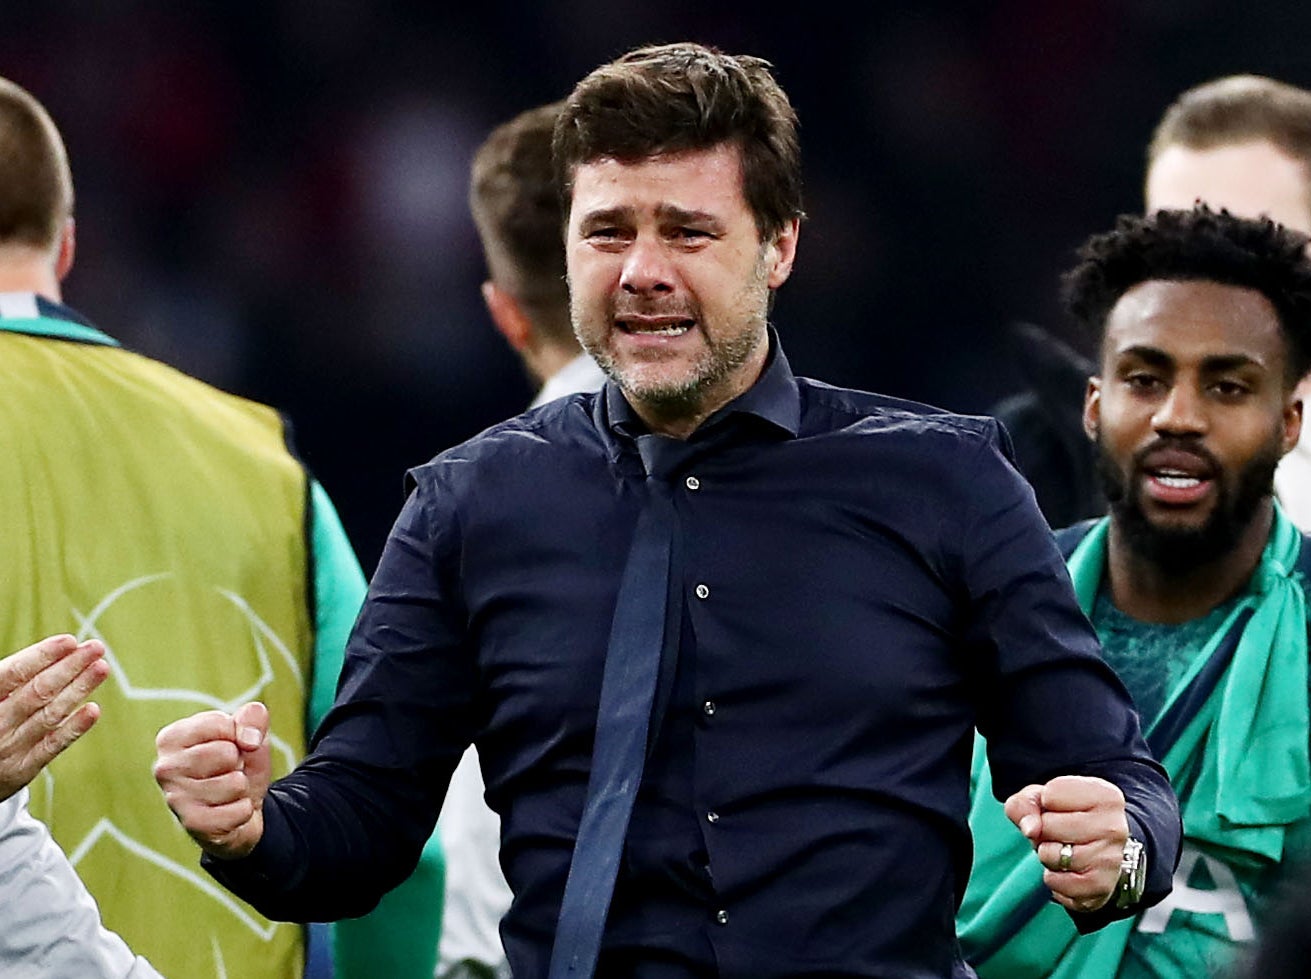 The result was one of the finest nights in Tottenham's history